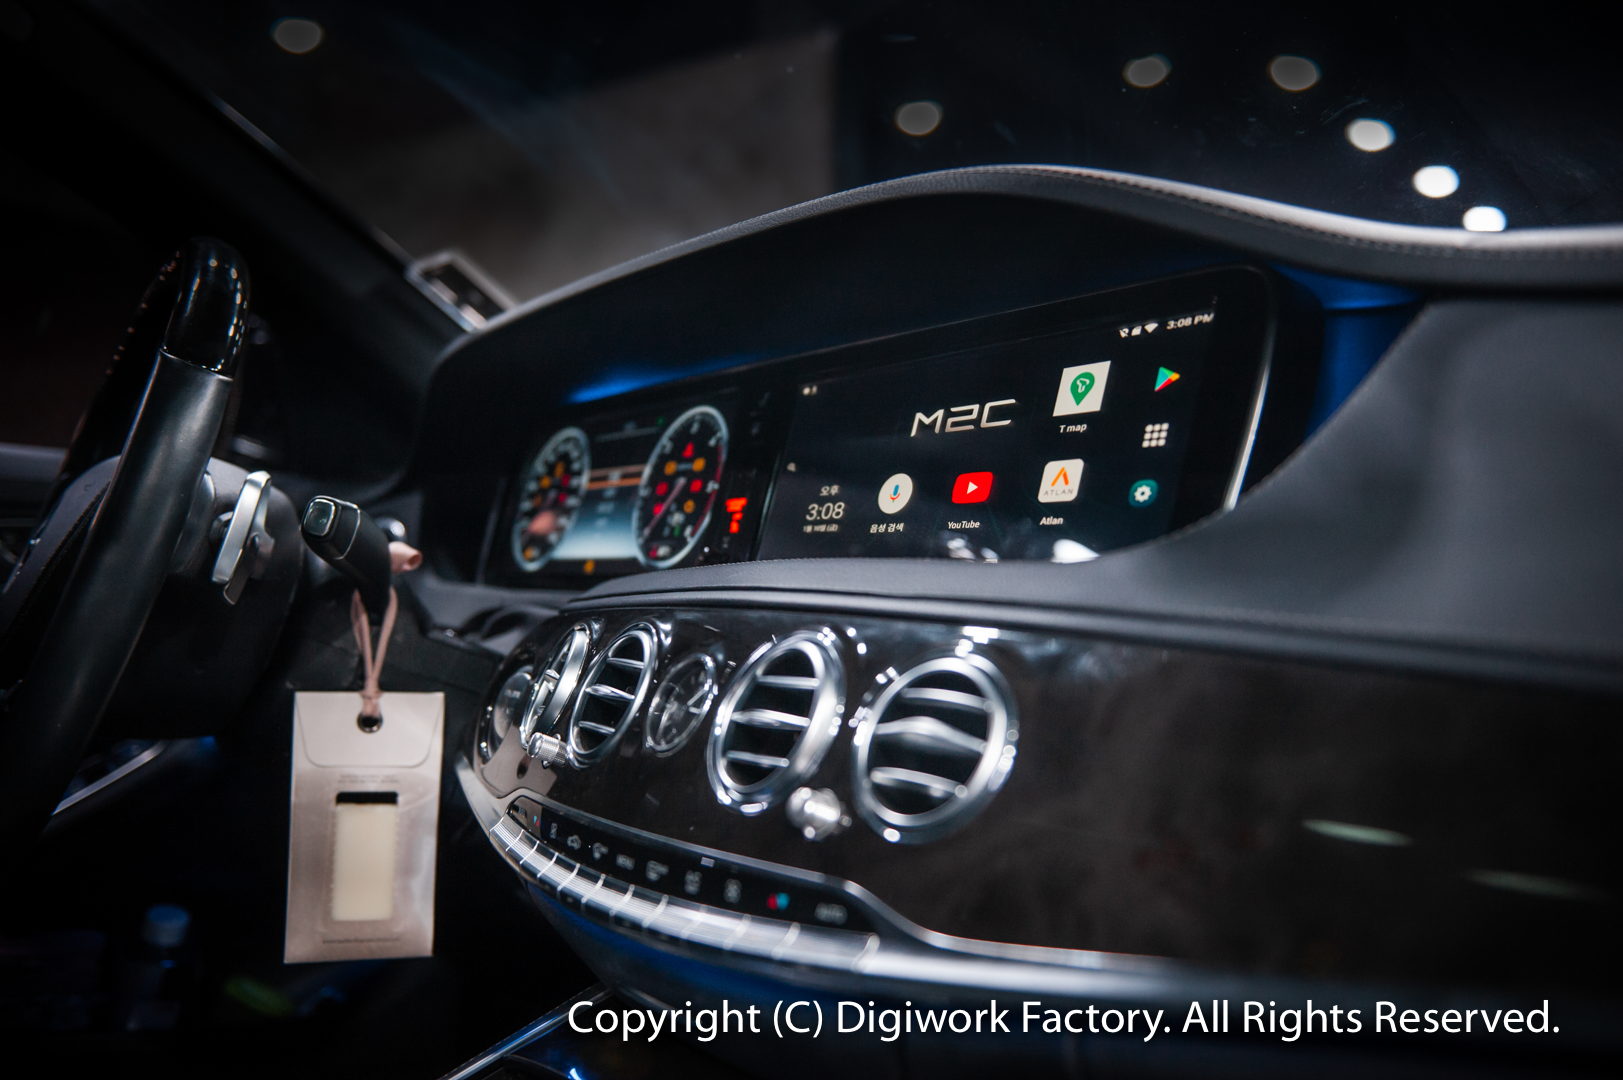 Android CarPC for 2015 Mercedes W222 "M2C-200"